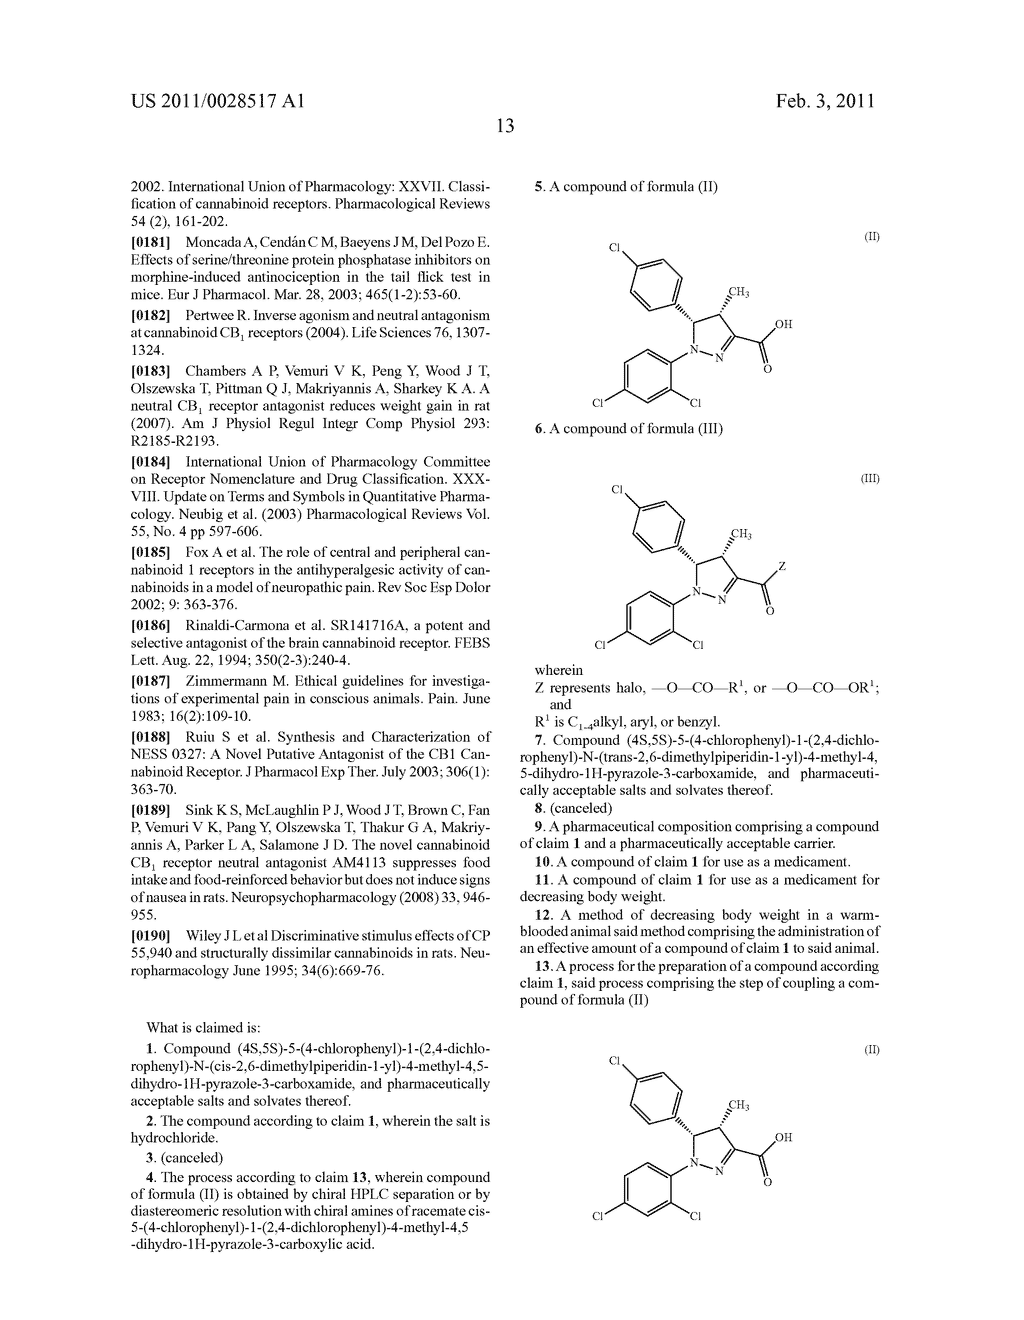 4-METHYL-4,5-DIHYDRO-1H-PYRAZOLE-3-CARBOXAMIDE USEFUL AS A CANNABINOID CB1 NEUTRAL ANTAGONIST - diagram, schematic, and image 21